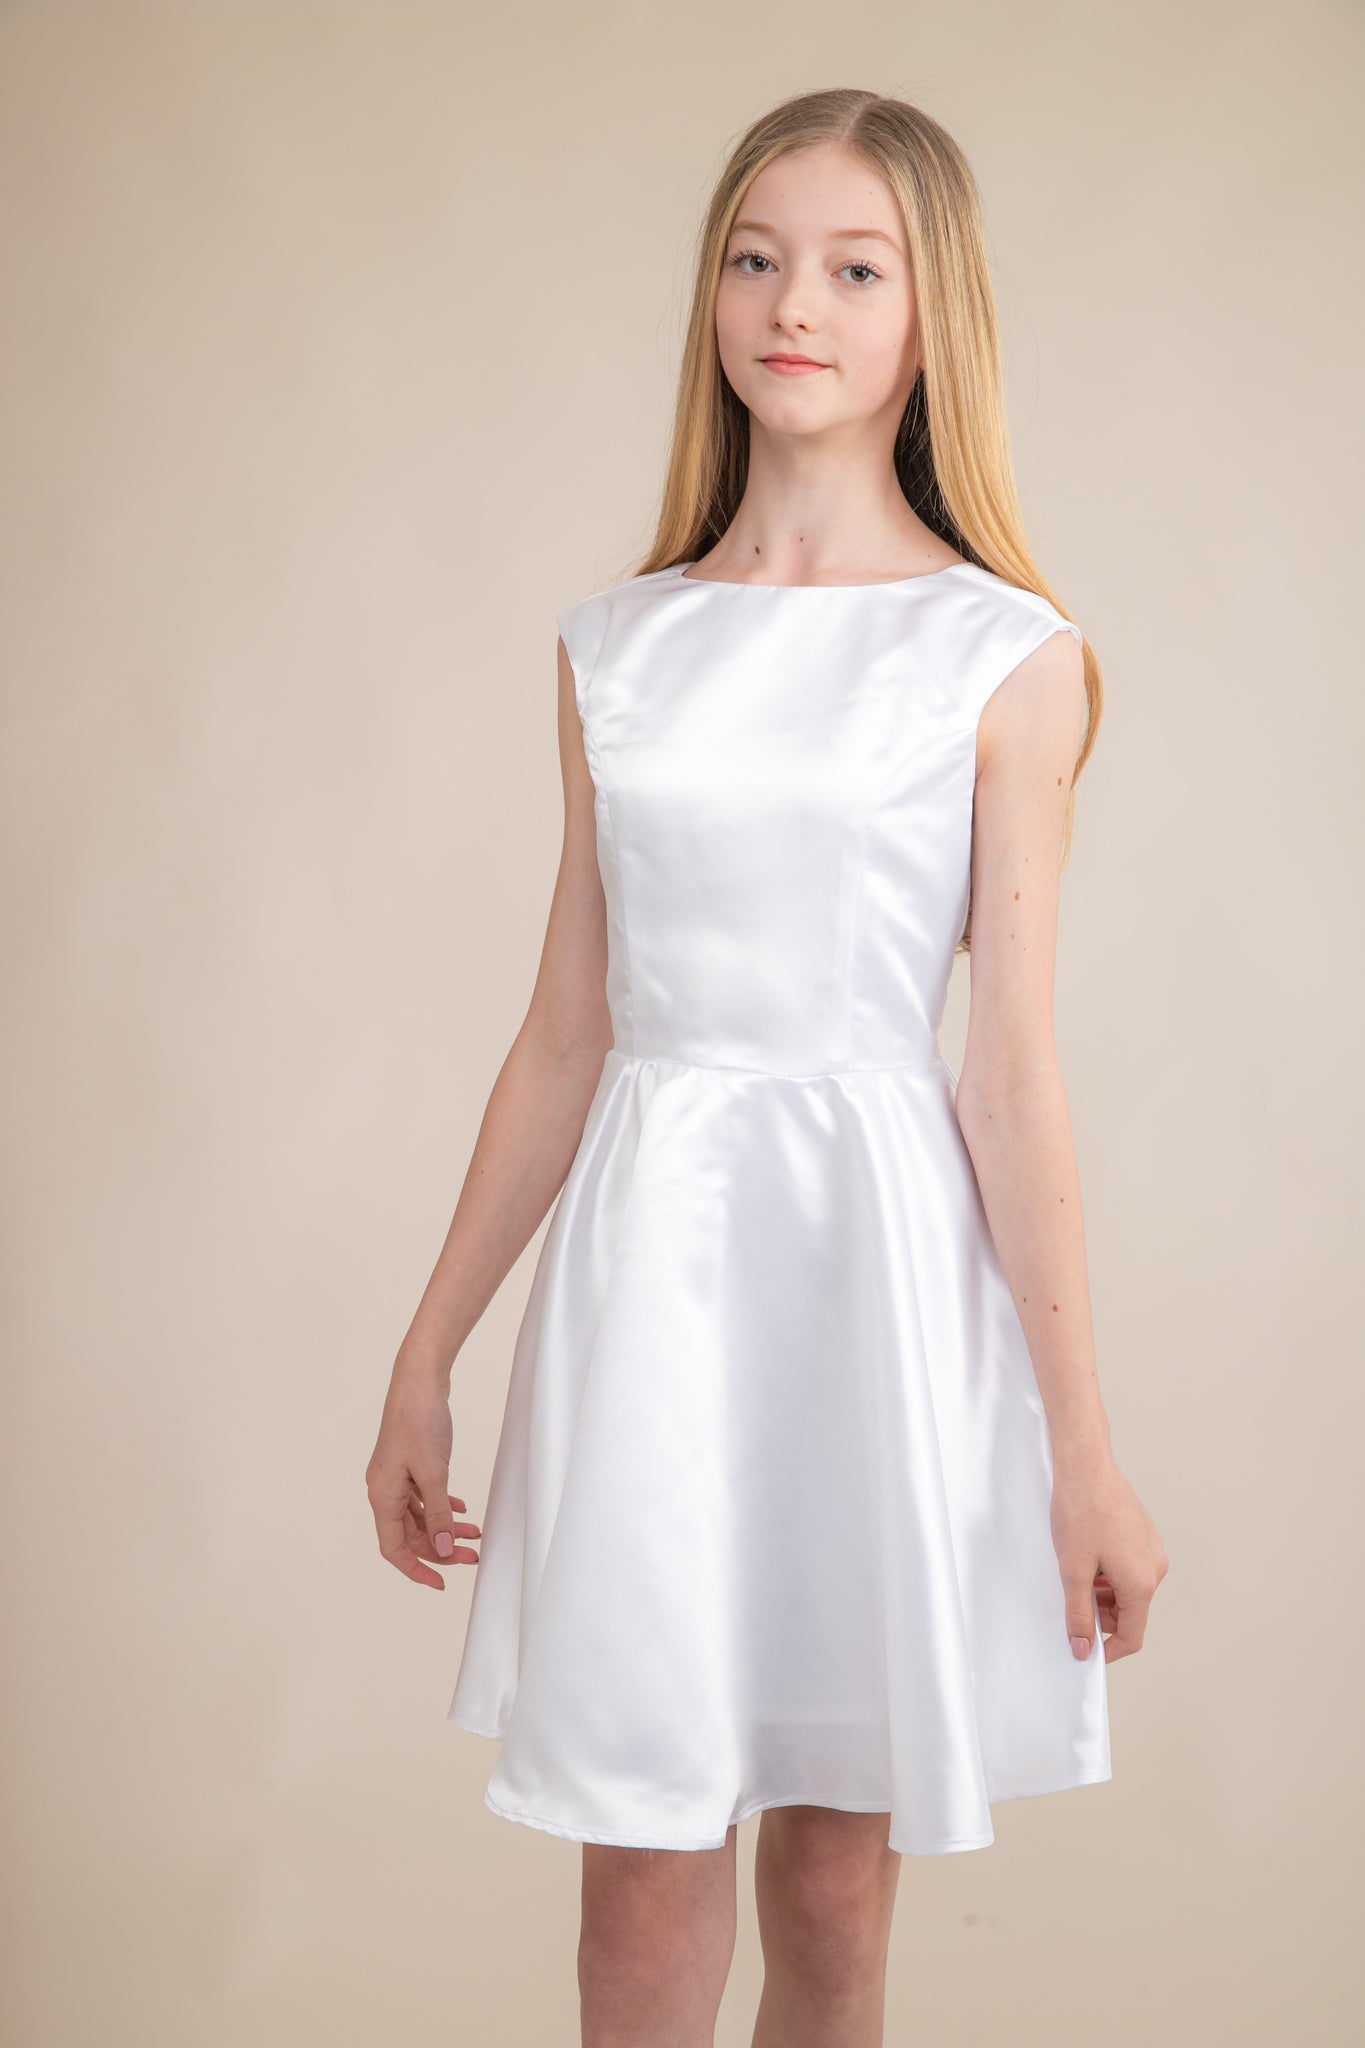 This is an all over satin, cap sleeve dress in white with non-stretch material, zipper back, and longer length detailing. This dress is perfect for any religious event like bat mitzvah, cotillion or church service.